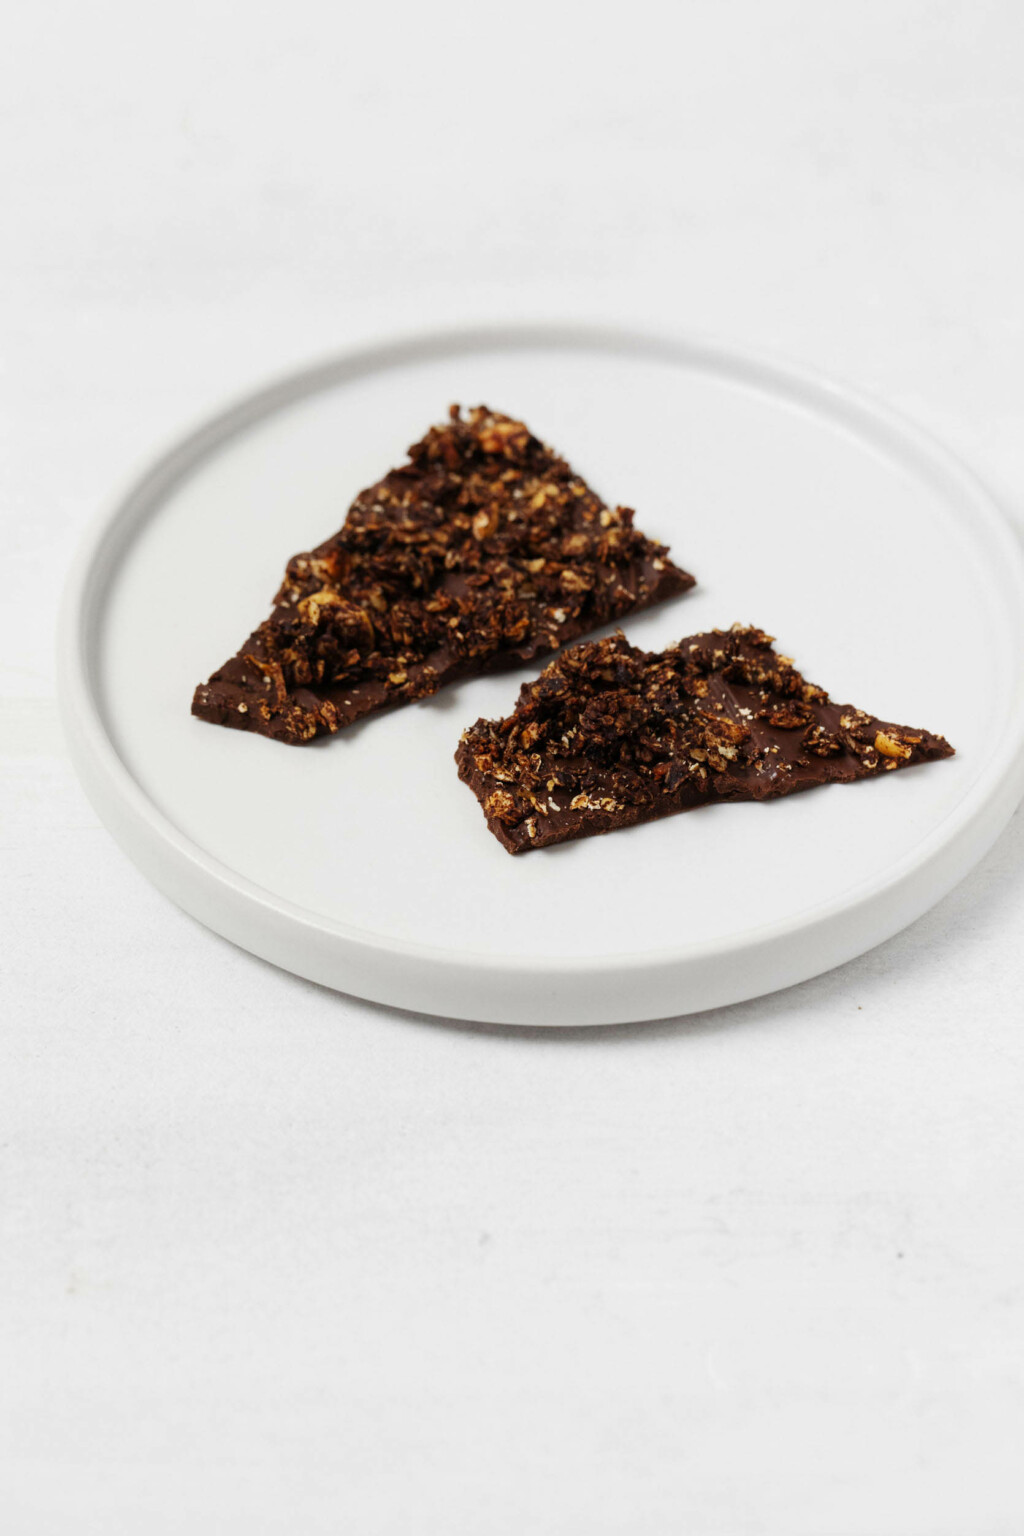 Two pieces of vegan granola dark chocolate bark have been broken and placed on a small, round white plate. The plate rests on a white surface.